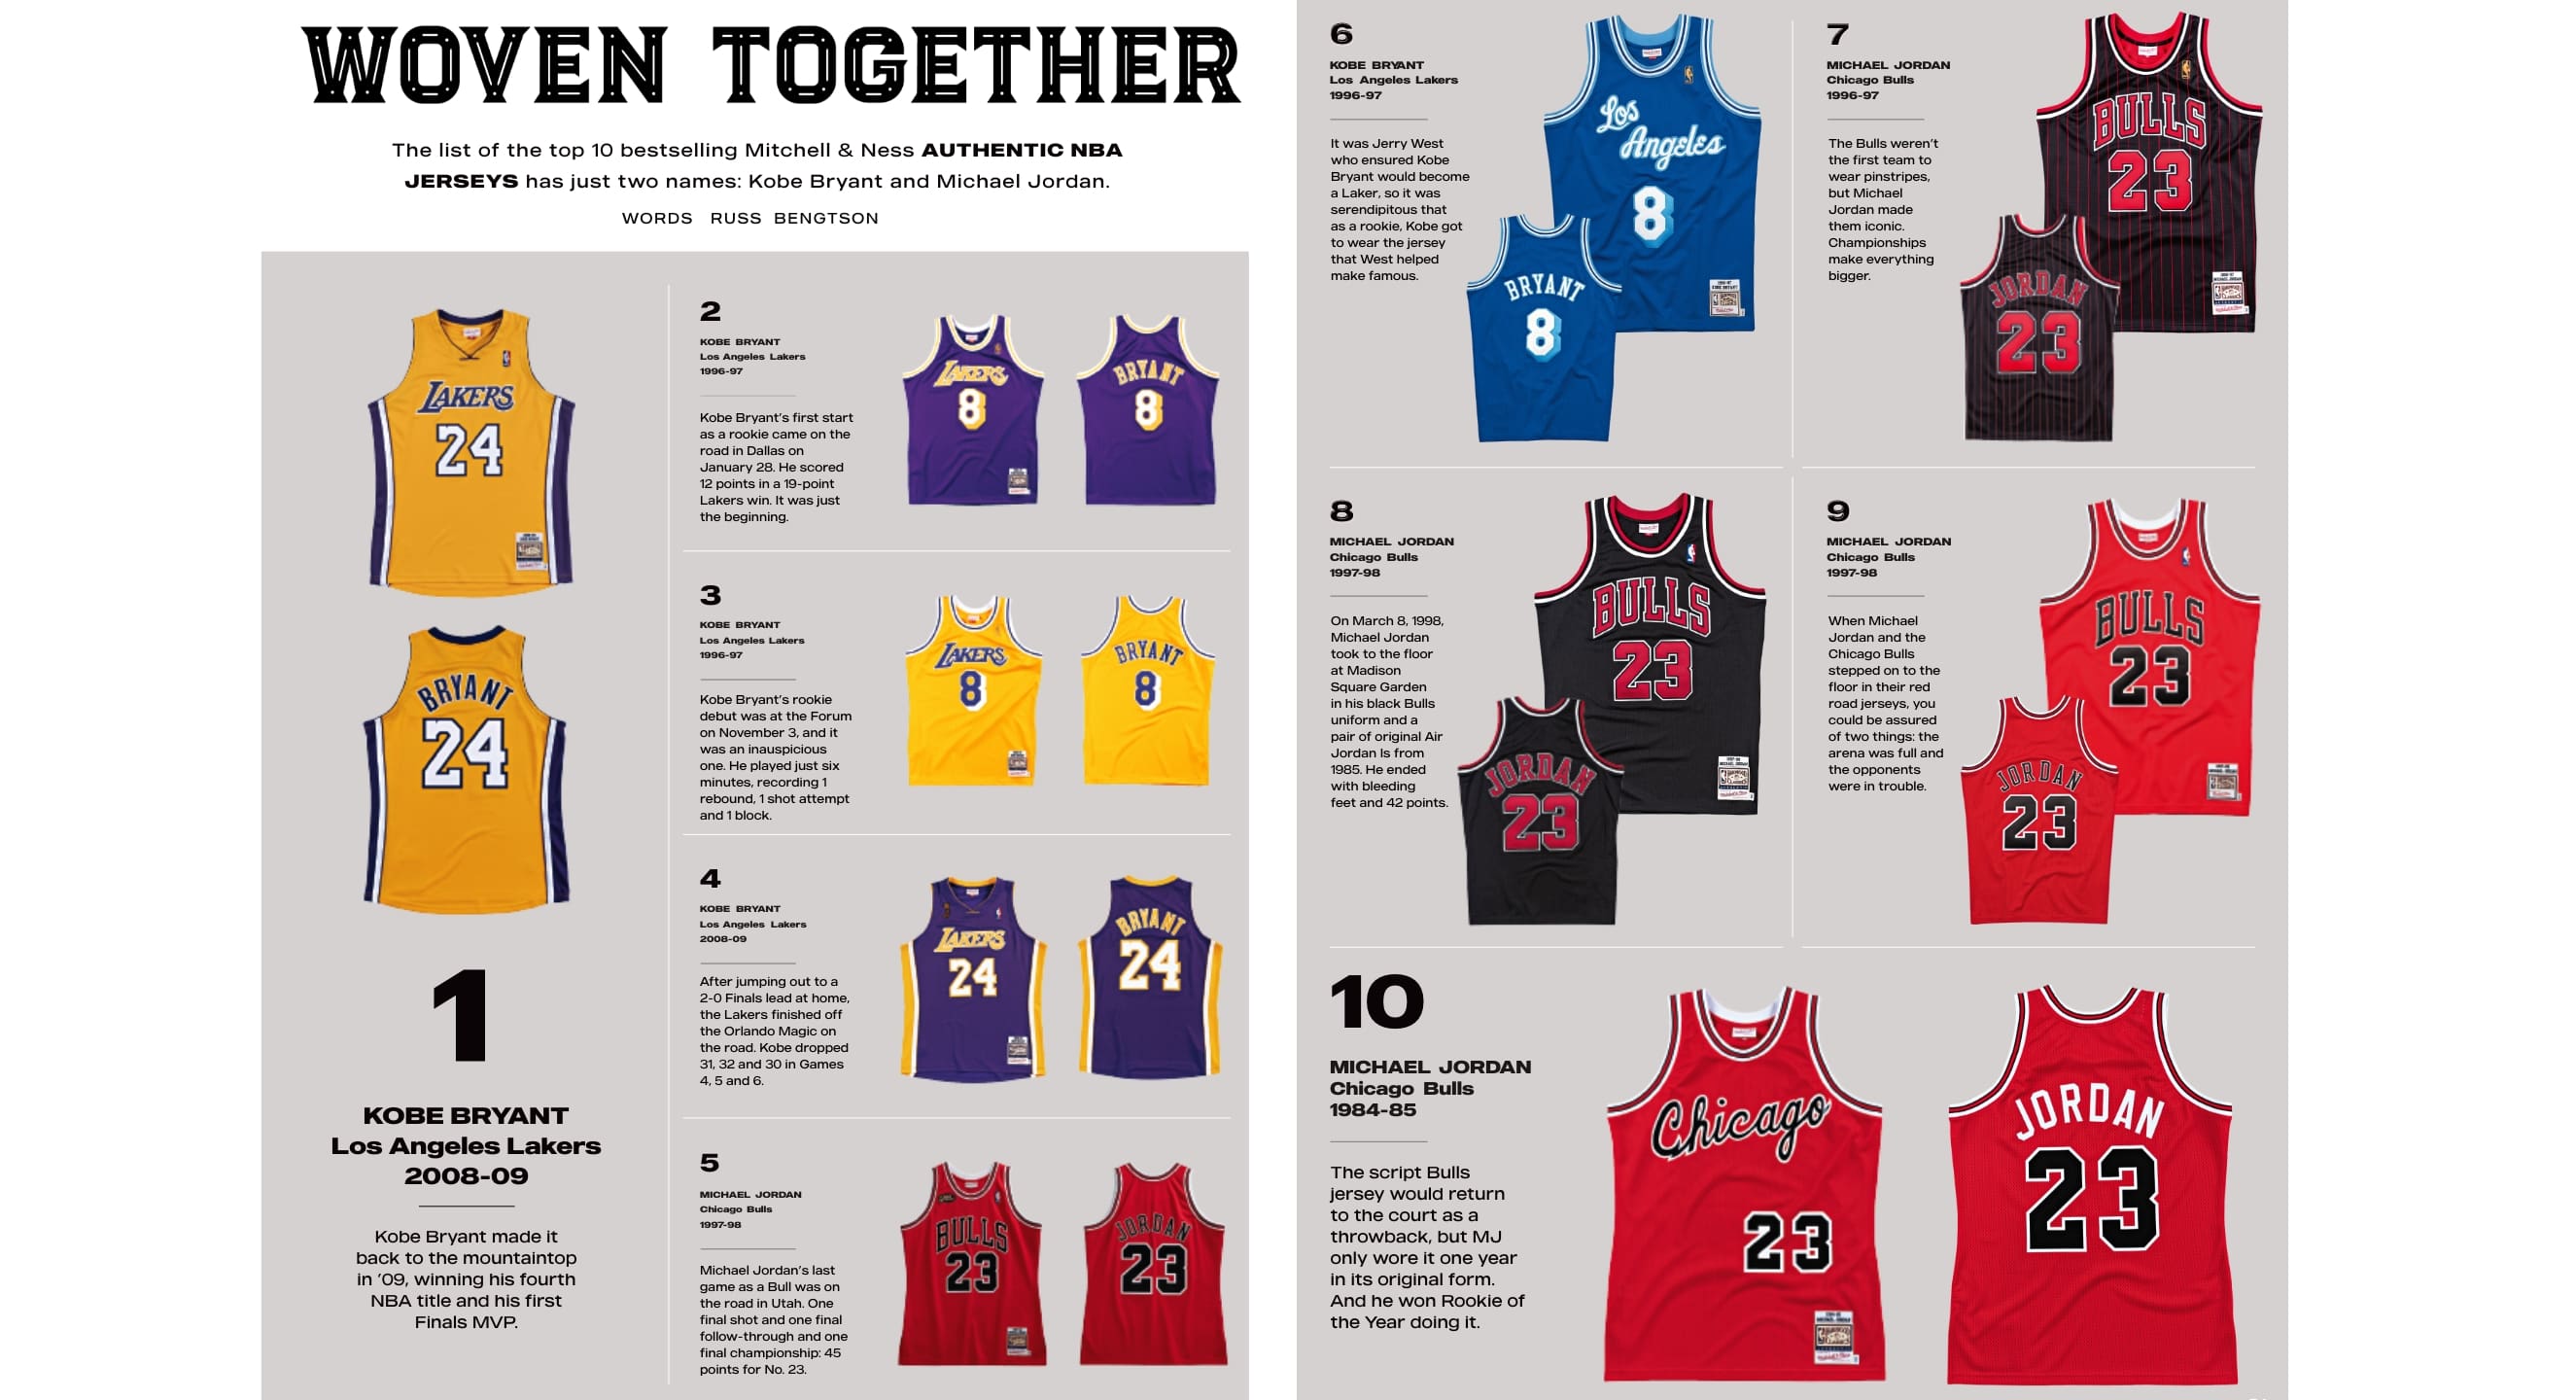 woven together - top 10 bestselling authentic nba jerseys - #1 Kobe Bryant - #2 Kobe Bryant - #3 Kobe Bryant - #4 Kobe Bryant - #5 Michael Jordan - #6 Kobe Bryant - #7 Michael Jordan - #8 Micheal Jordan - #9 Michael Jordan - #10 Michael Jordan